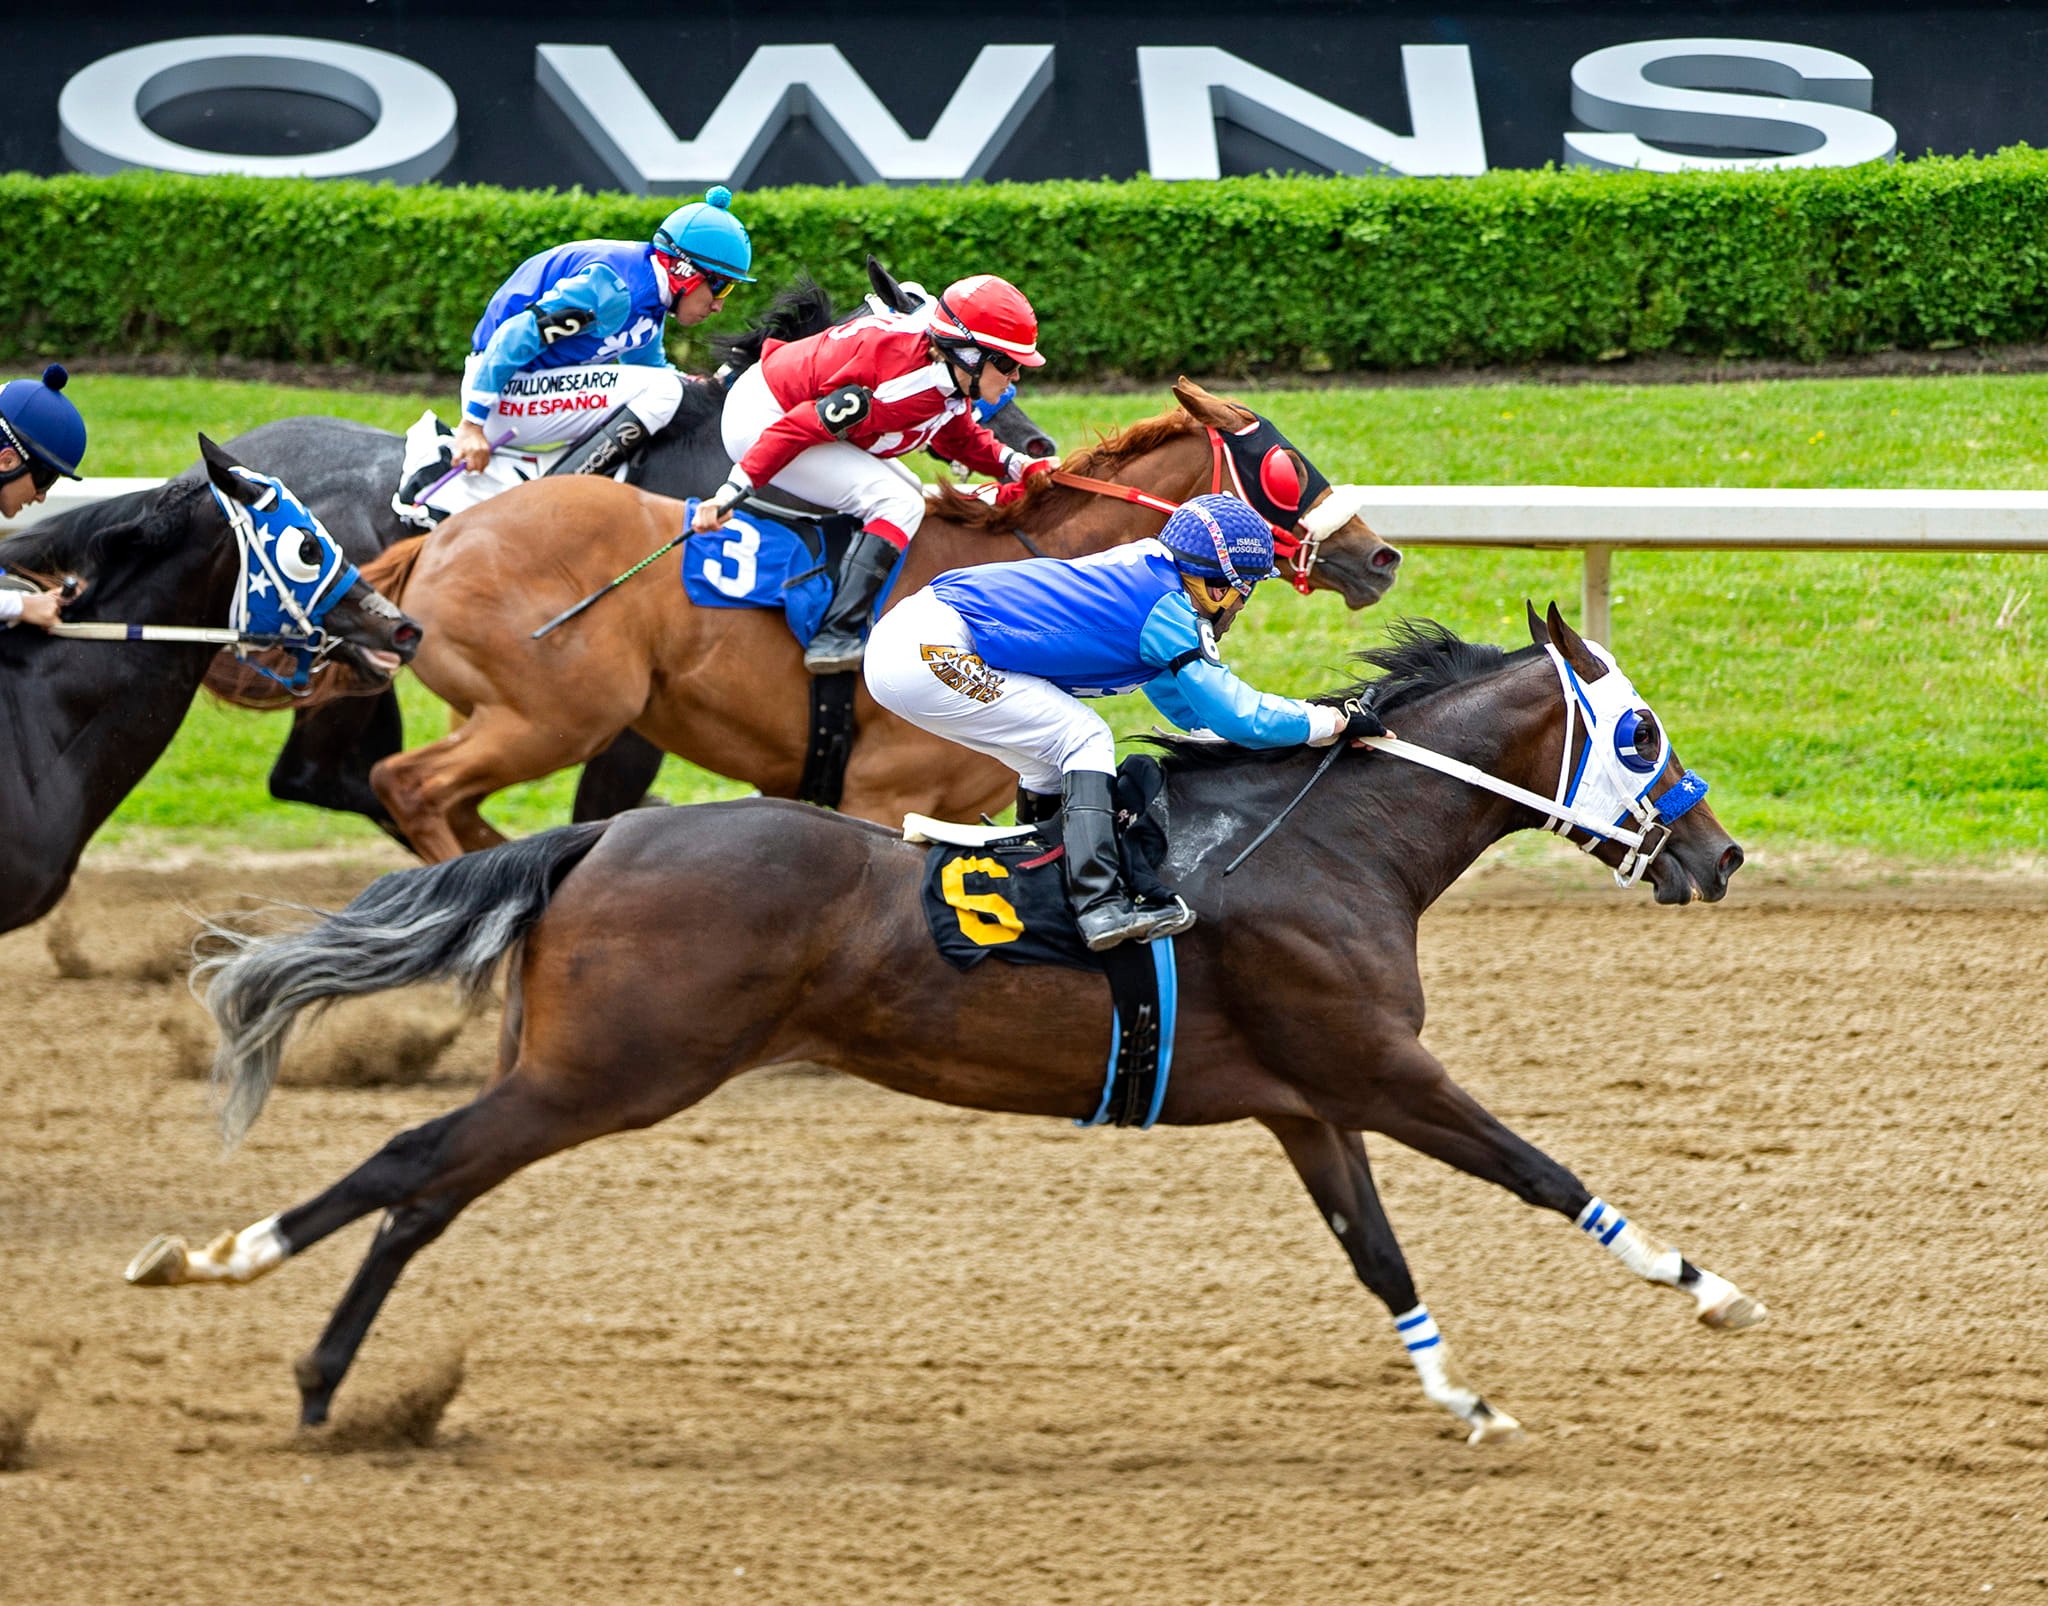 Pascoe Pair Top $57,510 Picov Derby on Race Day United Way!